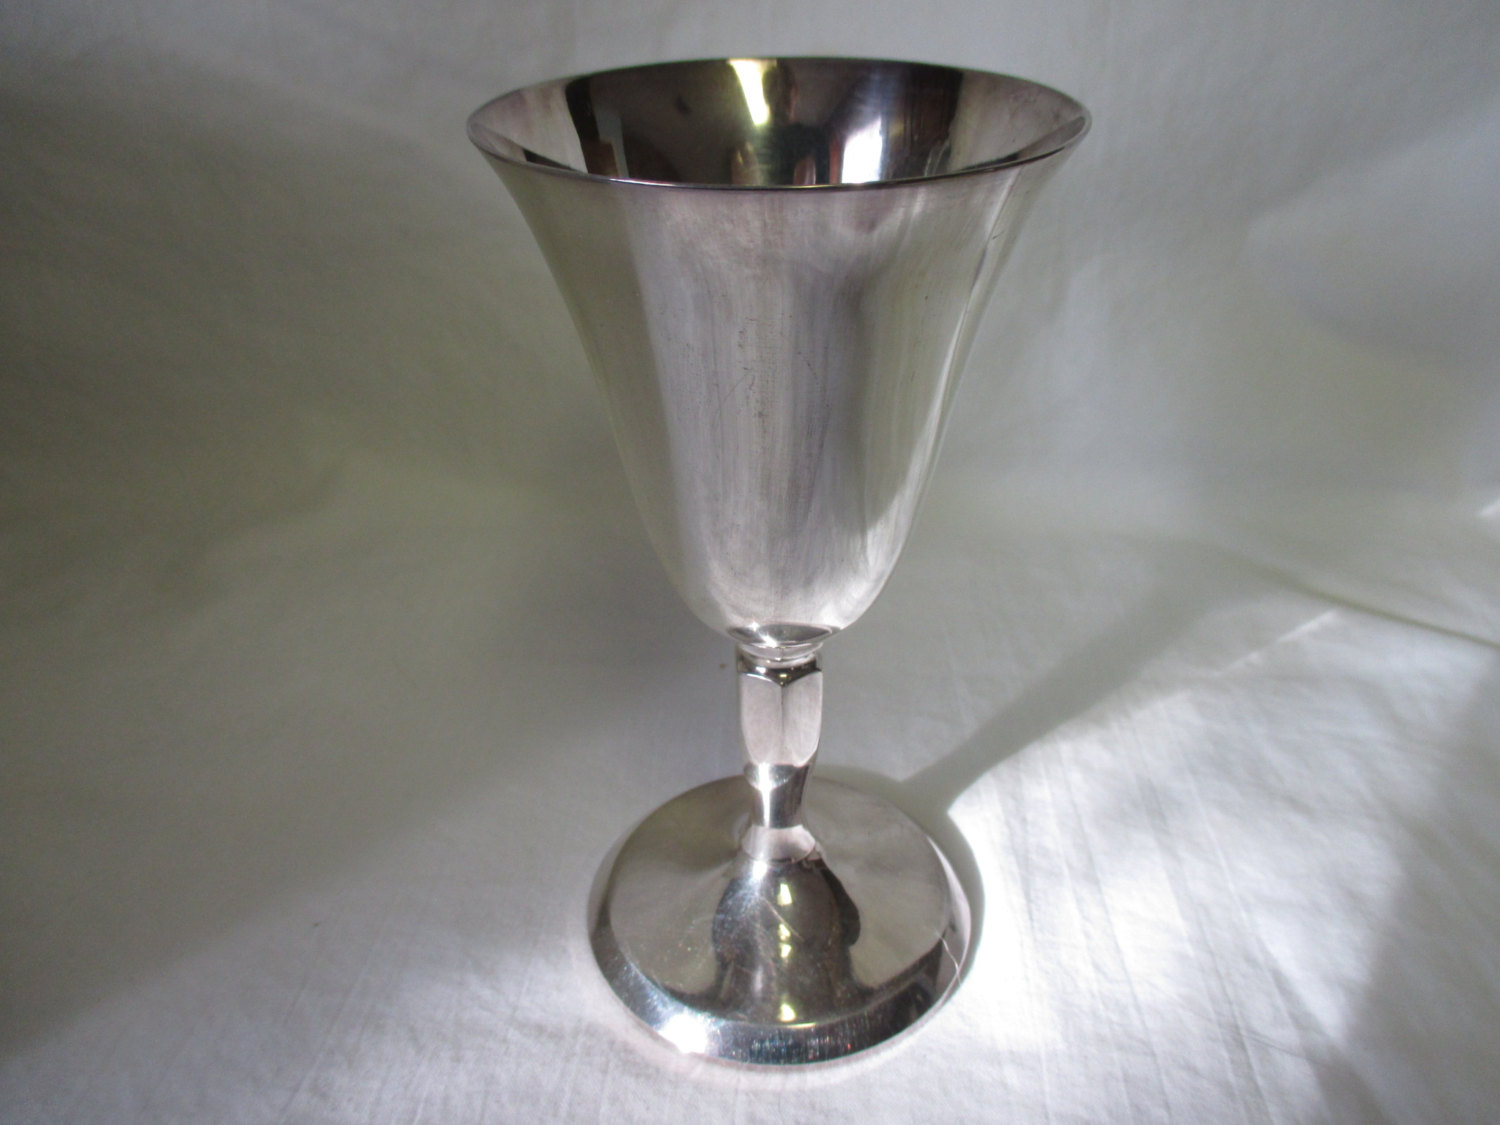 https://www.truevintageantiques.com/wp-content/uploads/2017/07/vintage-set-of-6-silverplate-wine-glasses-made-in-spain-in-original-box-mid-century-modern-wine-stems-goblets-595bea0a1.jpg